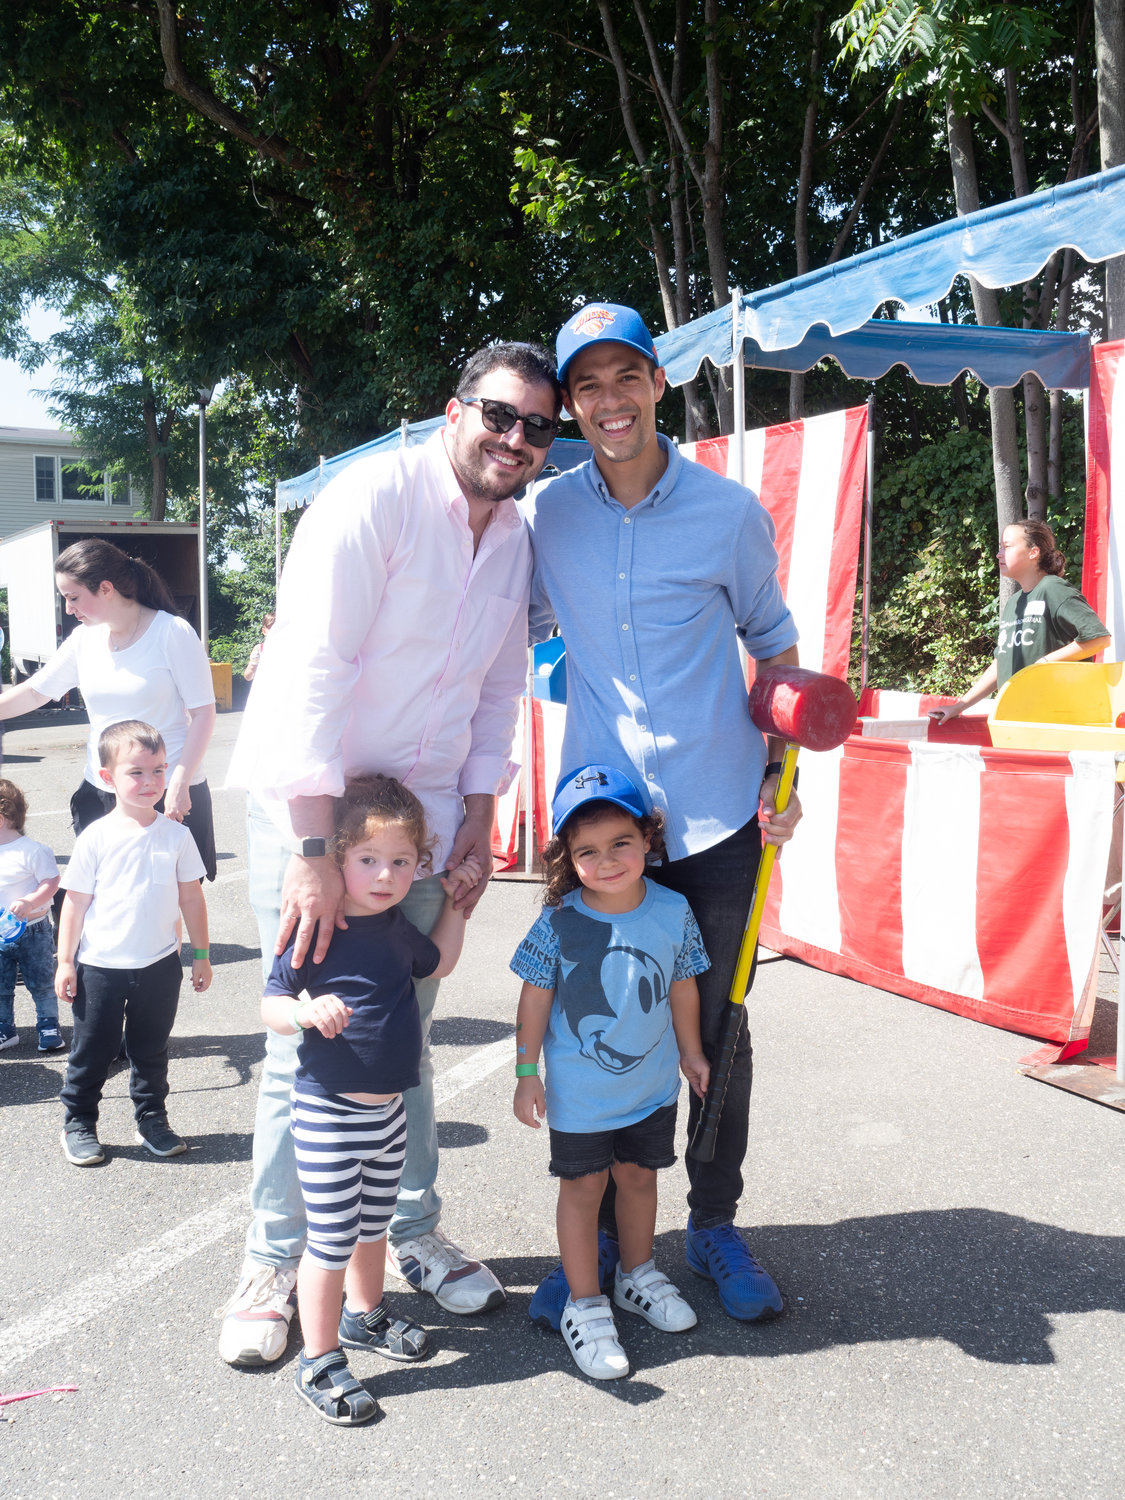 Families joined together at the JCC Fall Festival. Michael Nadjari and Nati Haboura with fathers, Jacob Nadjari, left, and Joseph Ouriel Haboura.